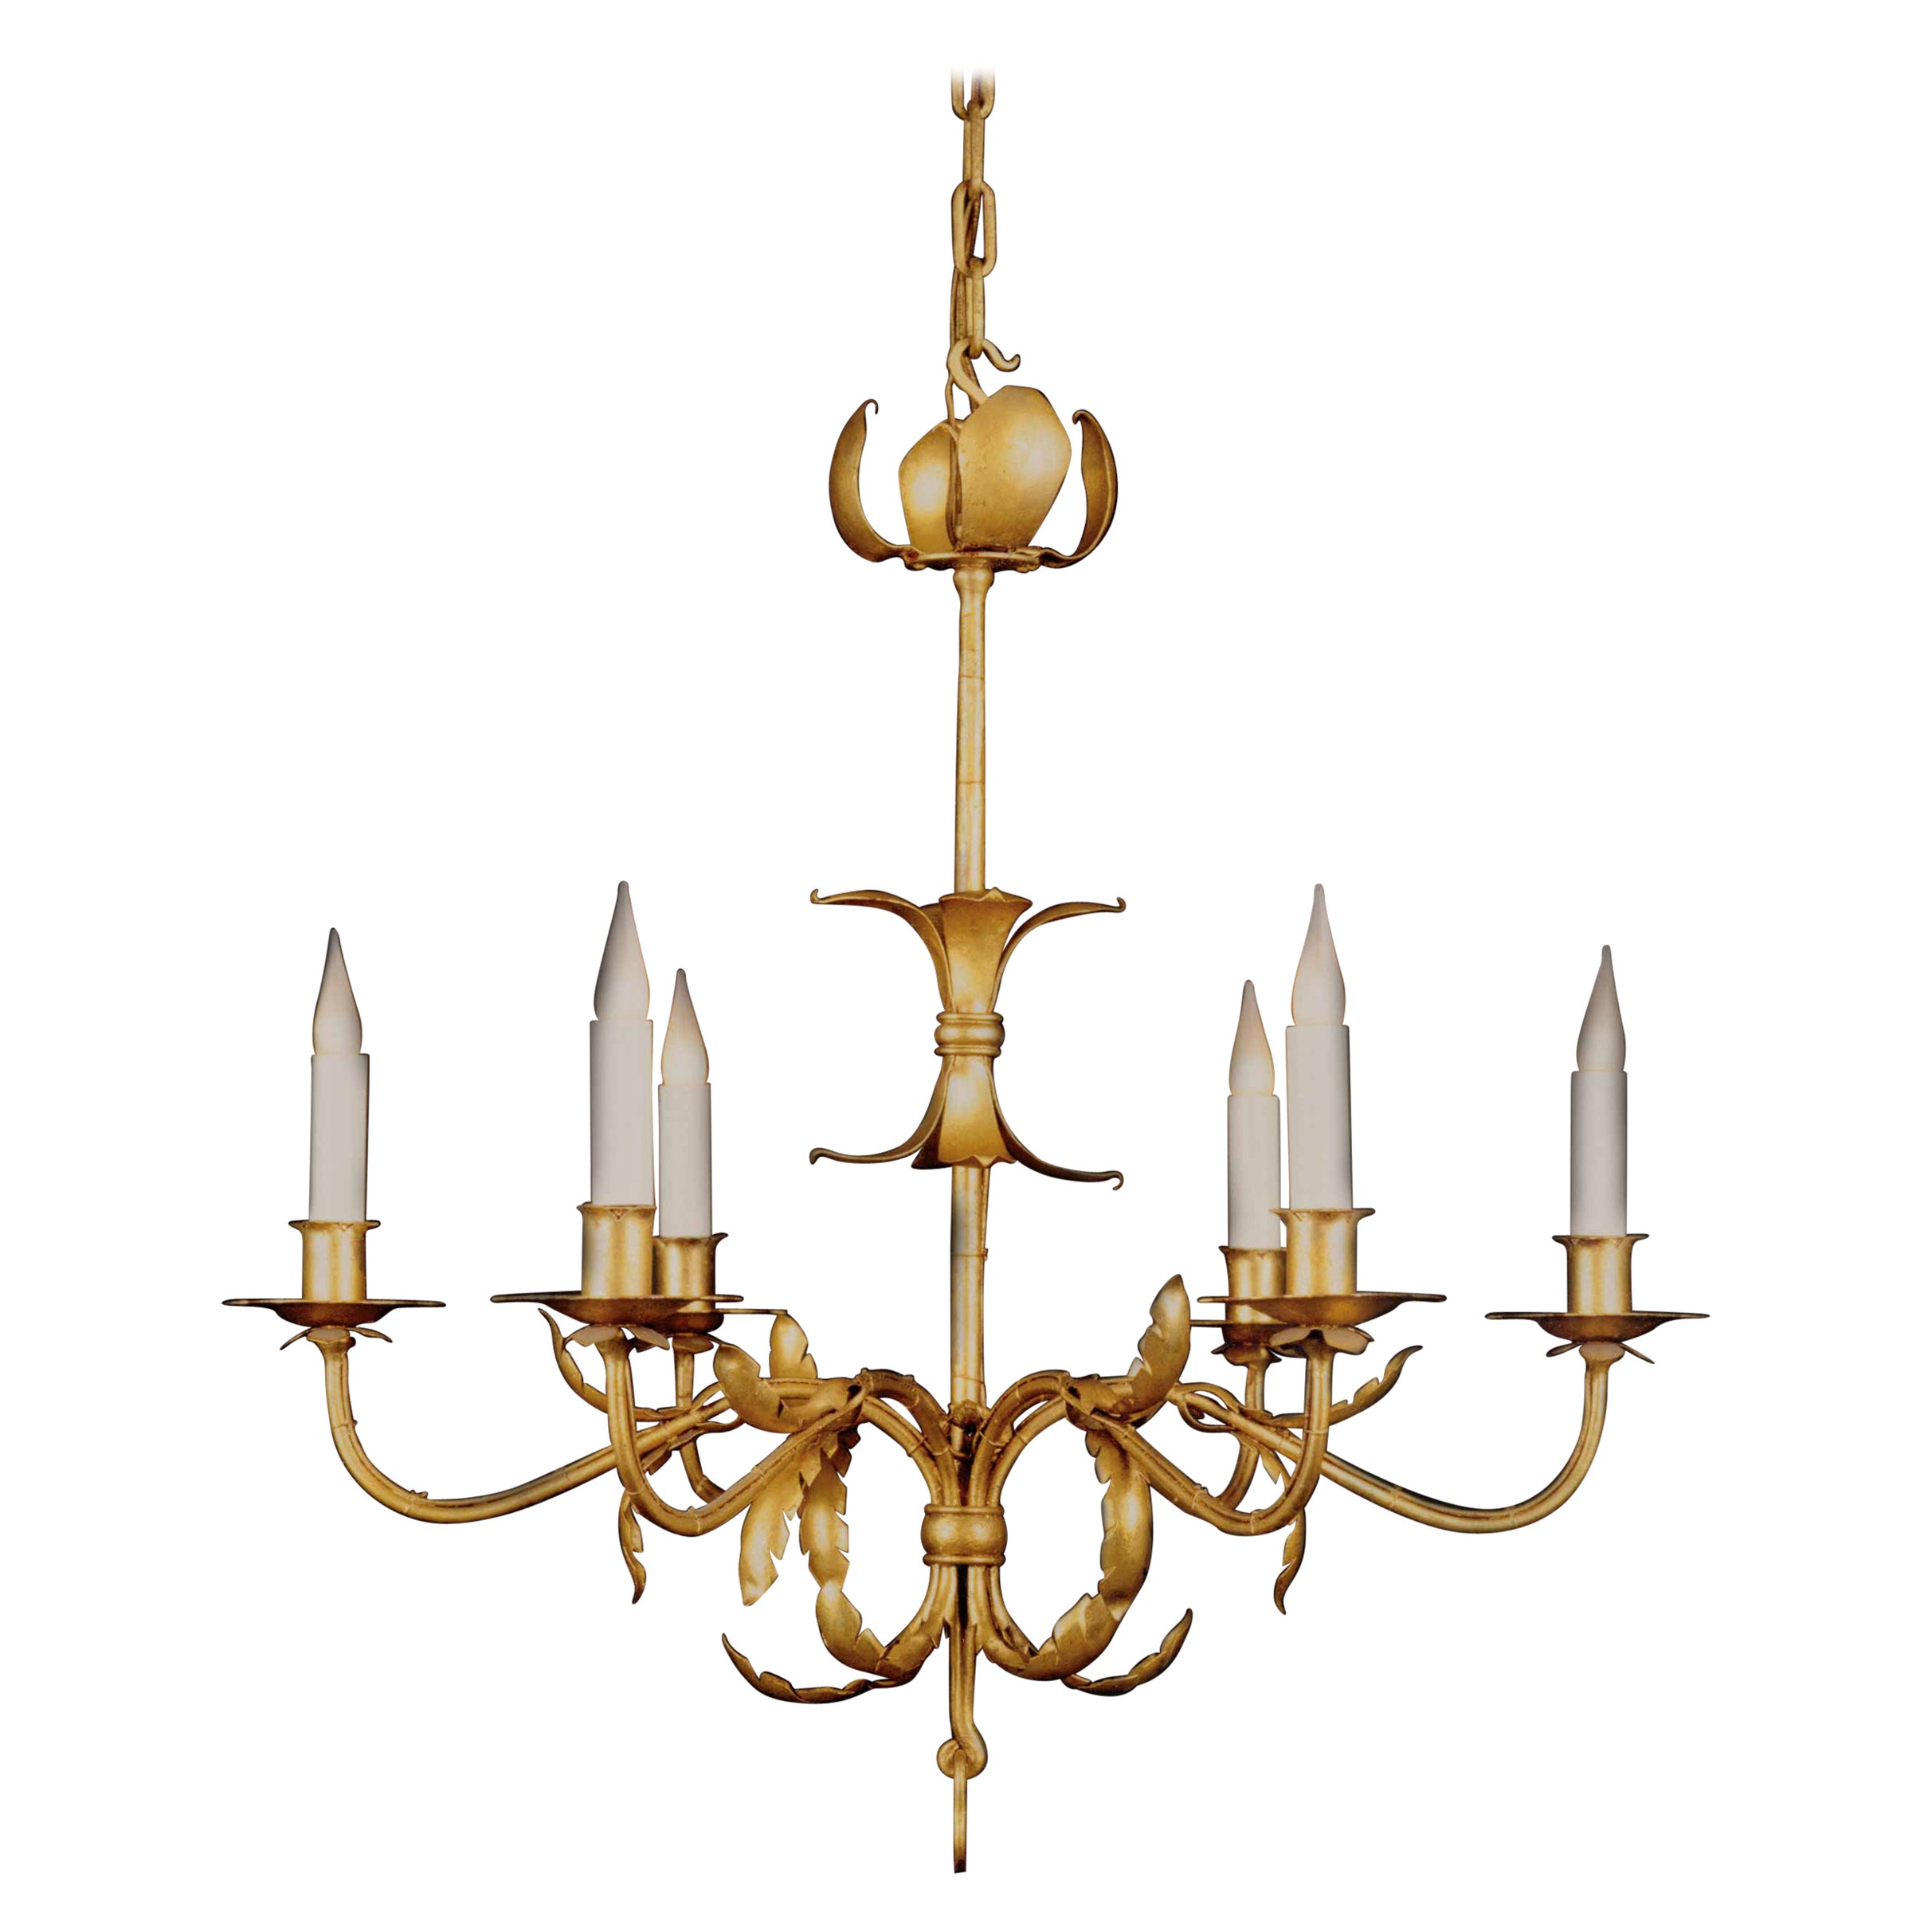 Certified Maison Bagues Chandelier, 6 Lights Iron #10313 For Sale